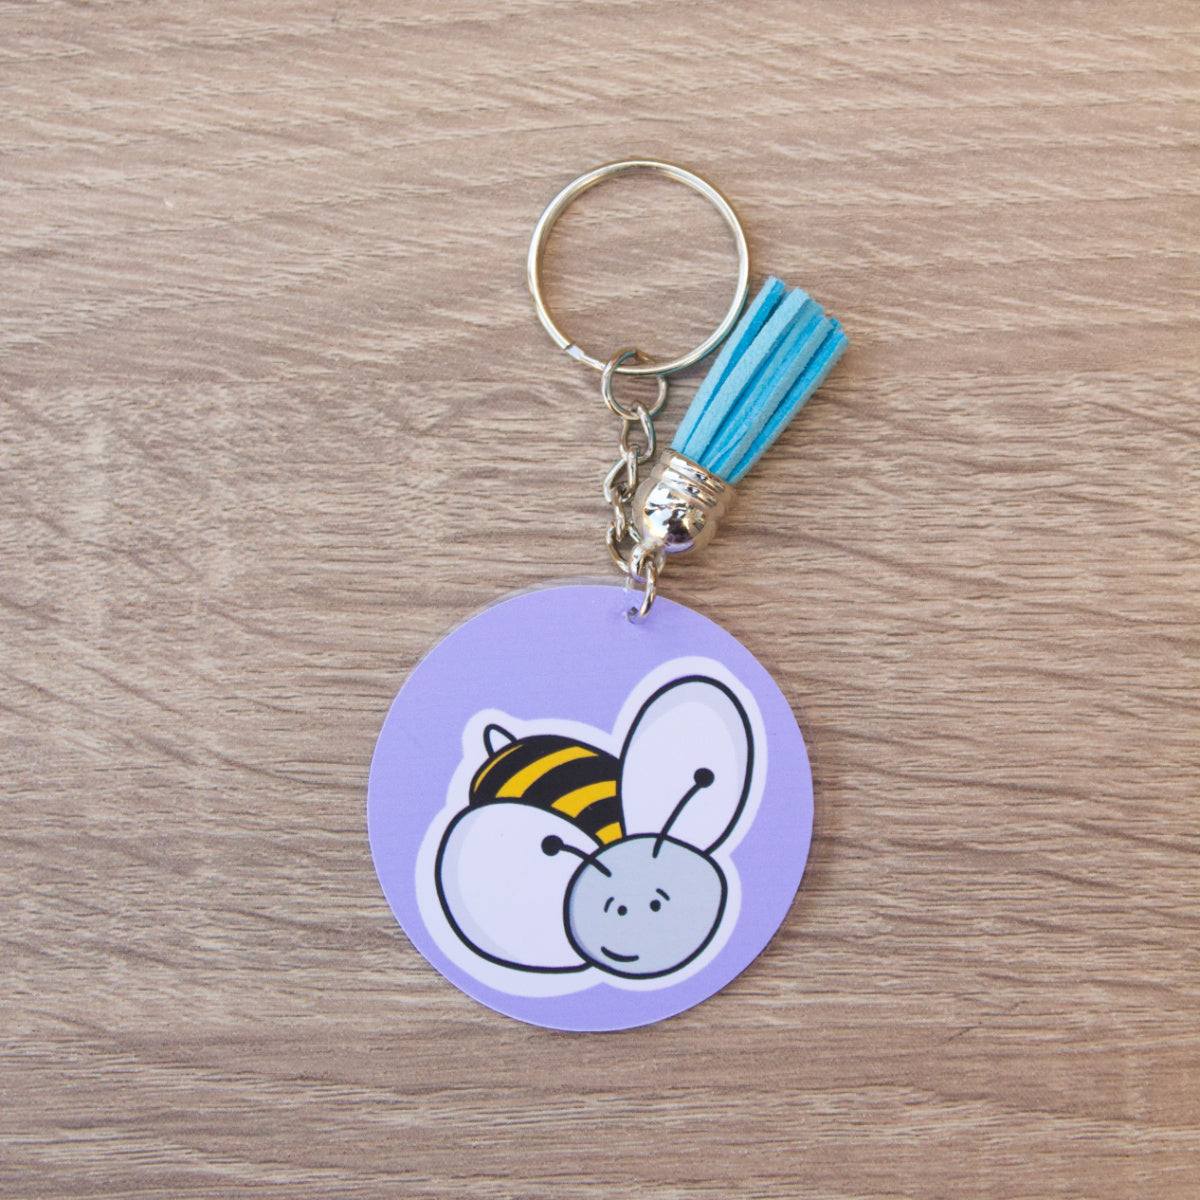 A Bumblebee Acrylic Keyring with a purple background features a cute cartoon bee with a smiling face and white wings. Attached to the keychain is a small blue tassel, all set on a wooden surface.